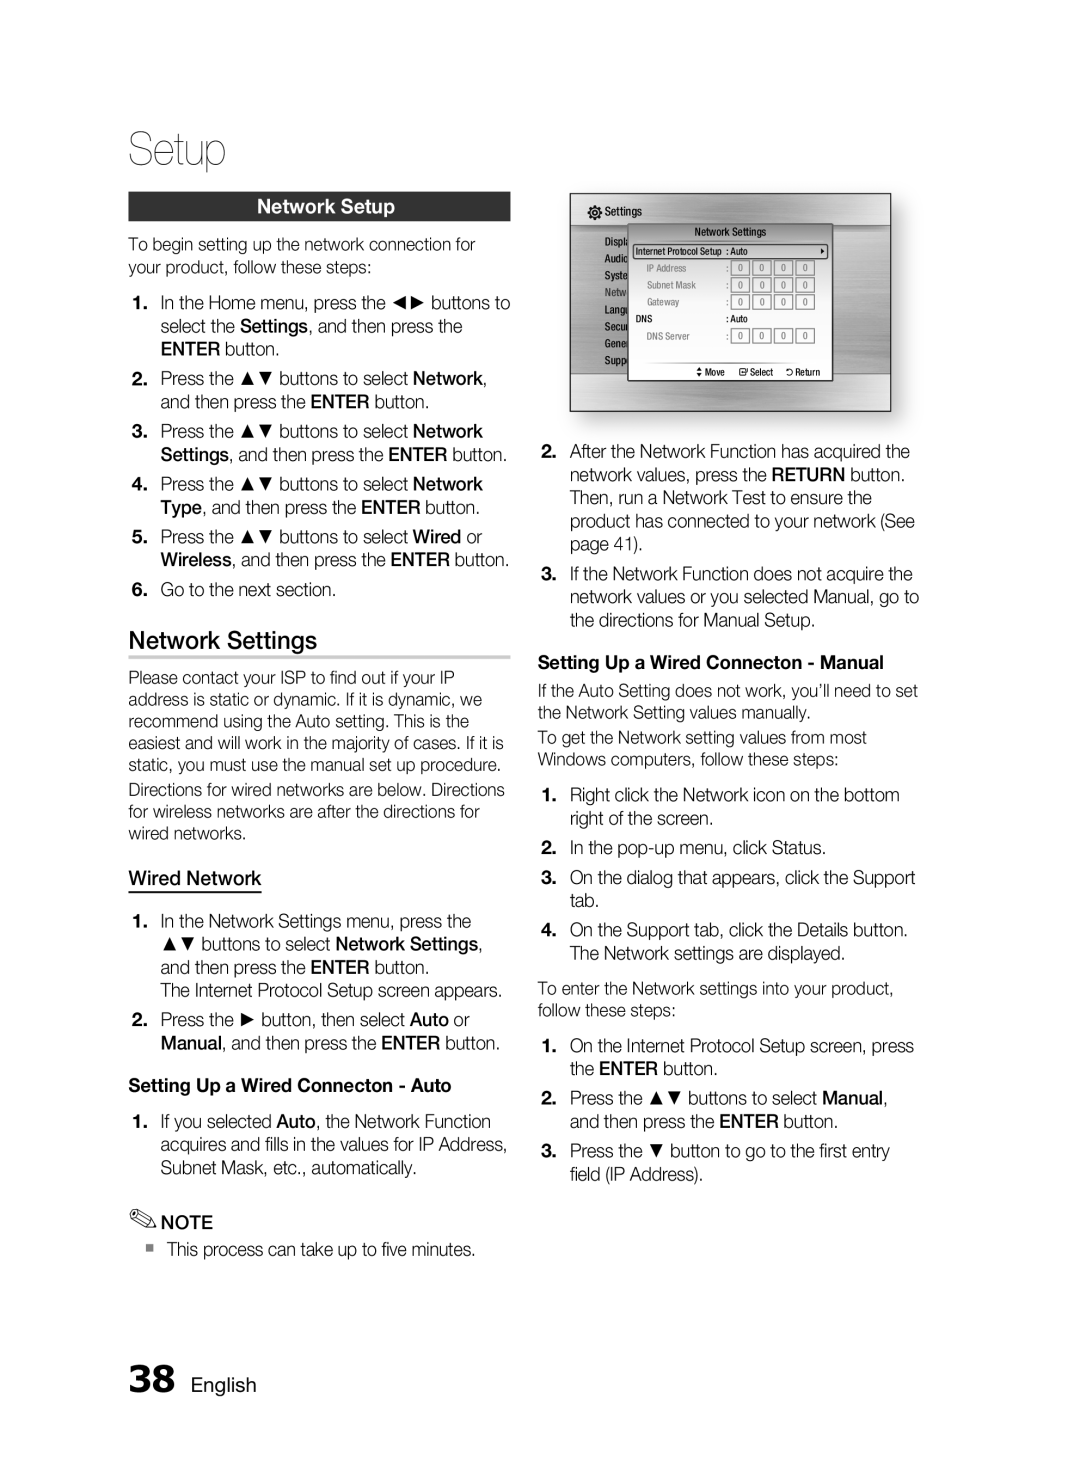 Samsung AH68-02255S, HT-C6530 user manual Network Settings, Network Setup, Wired Network, English 